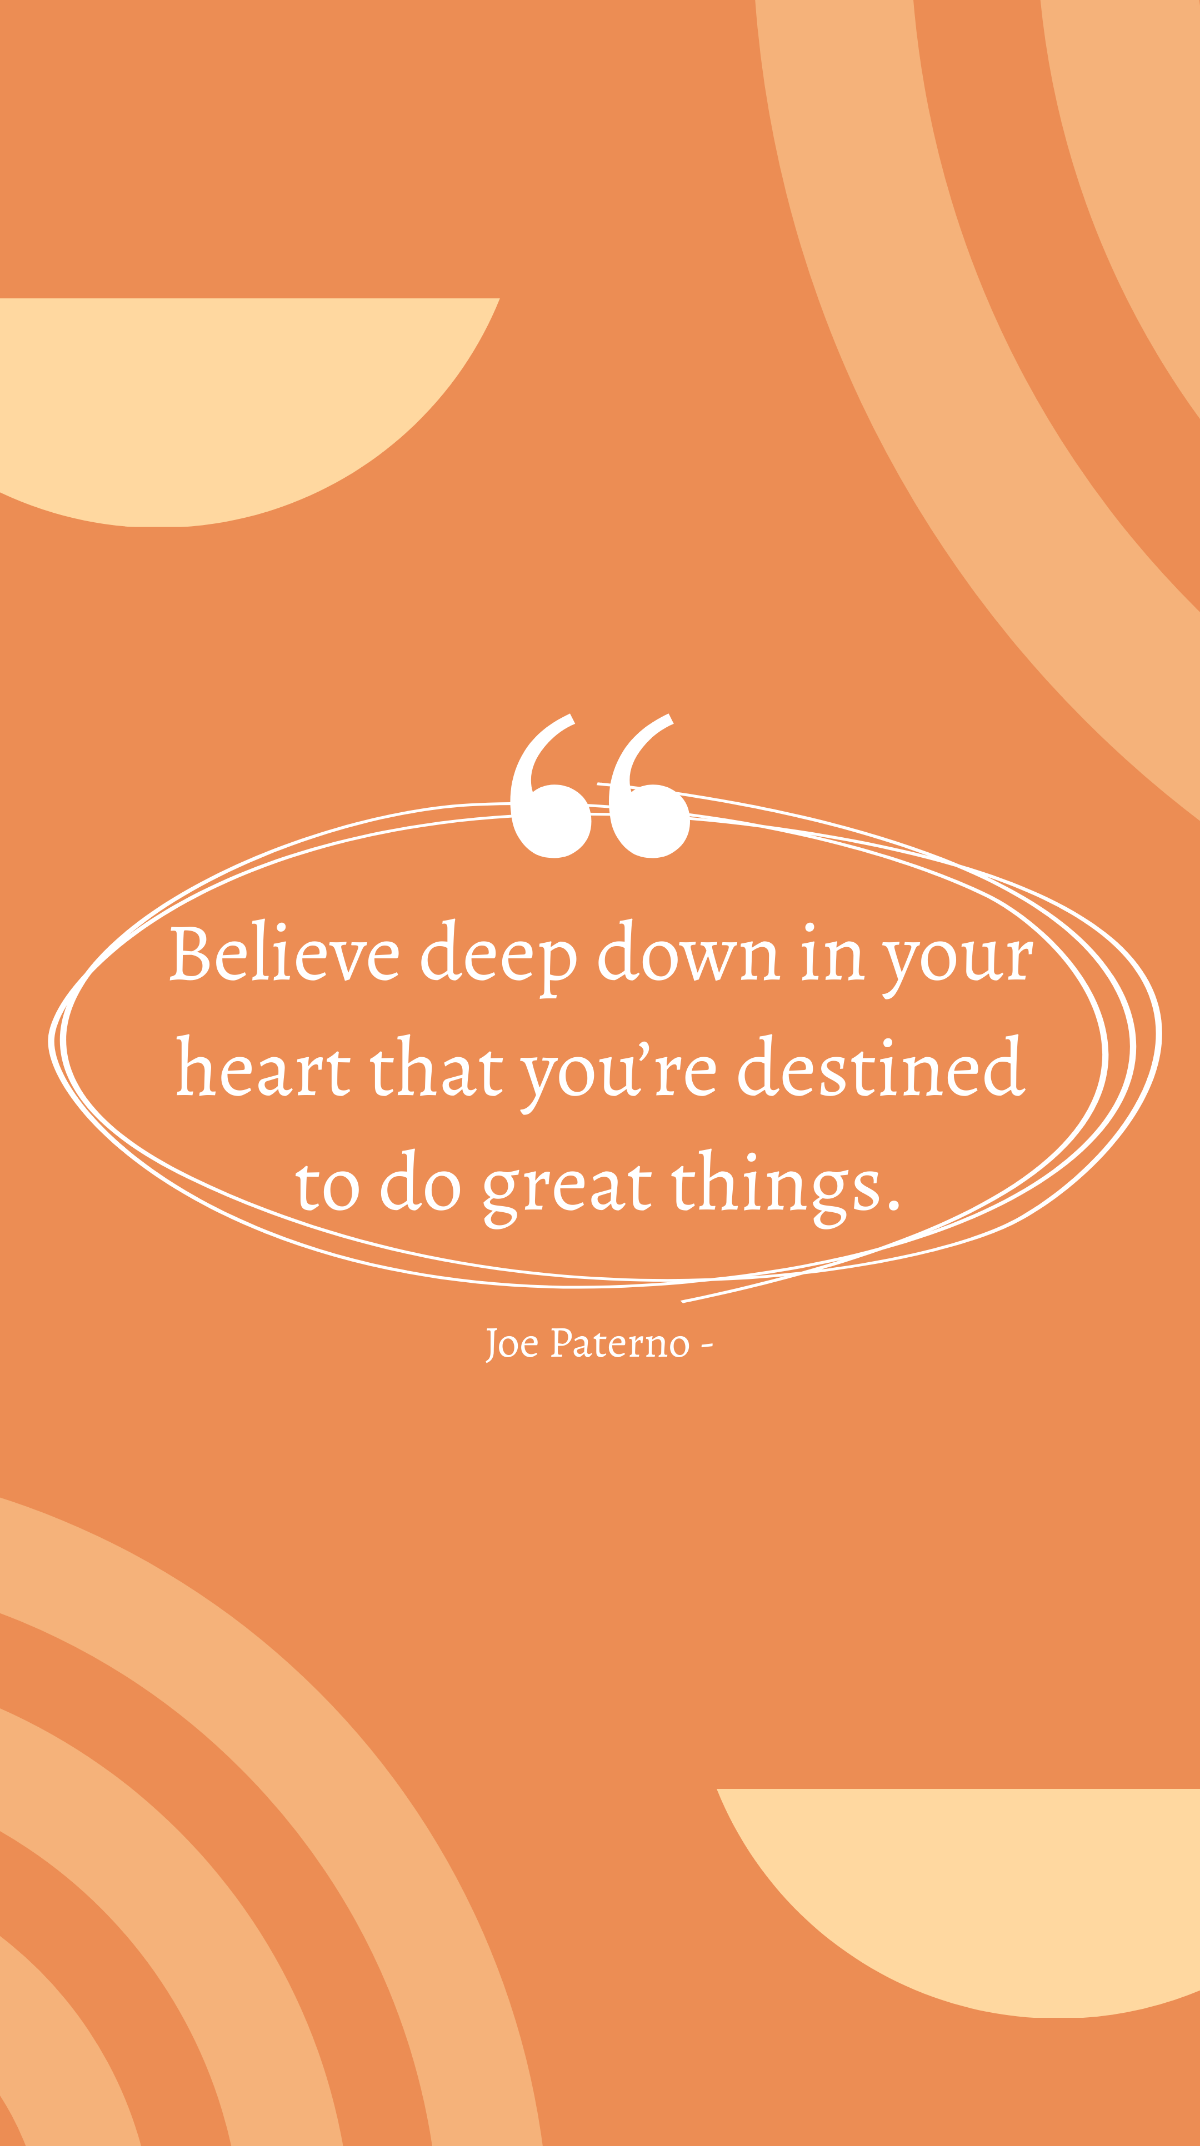 Joe Paterno - Believe deep down in your heart that you’re destined to do great things. Template